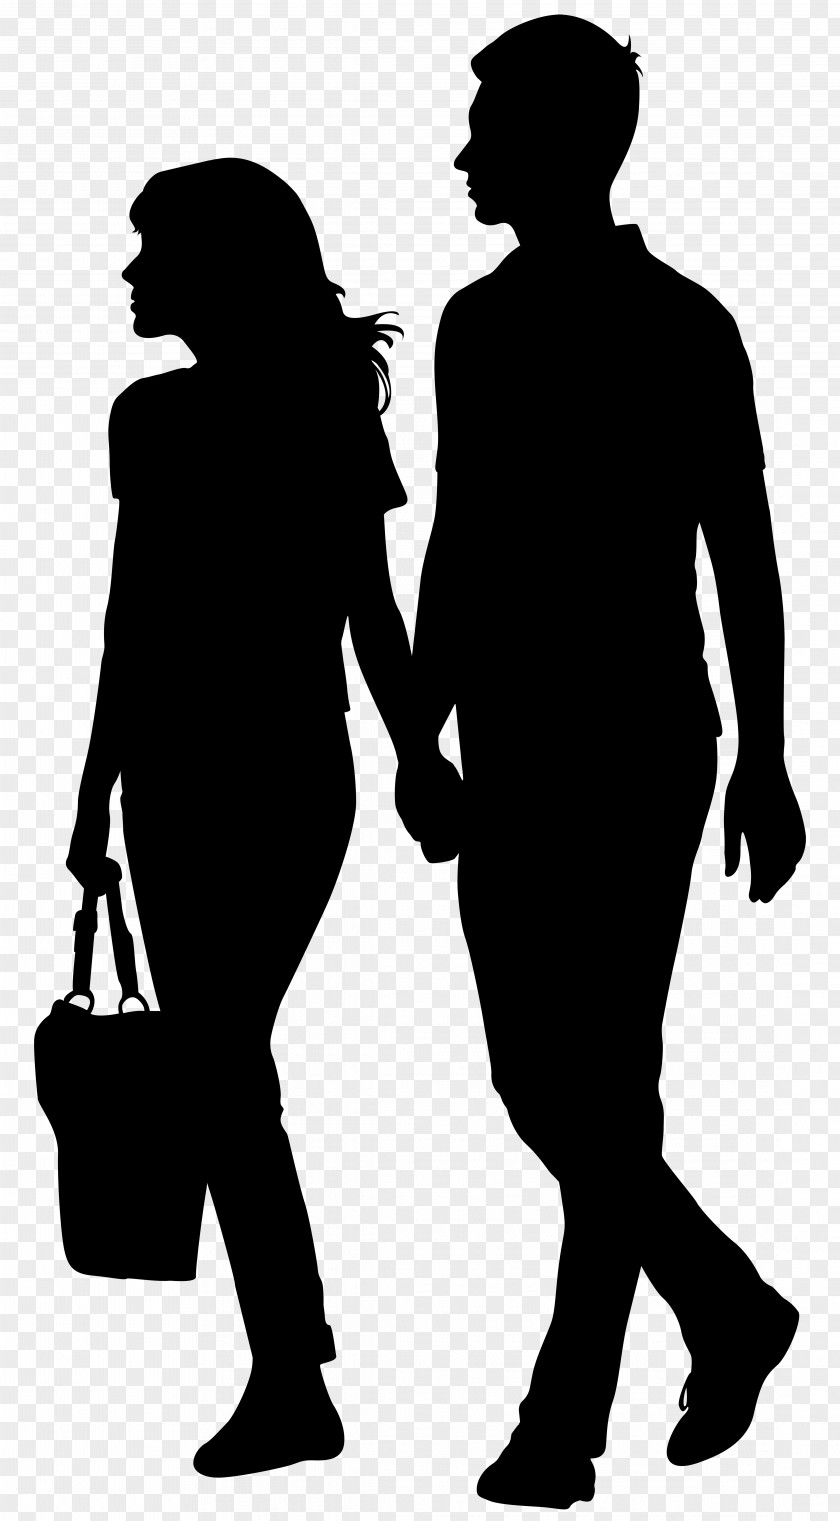 Holding Hands Couple_Silhouette Clip Art Image Song Lyrics YouTube Film MPEG-4 Part 14 PNG